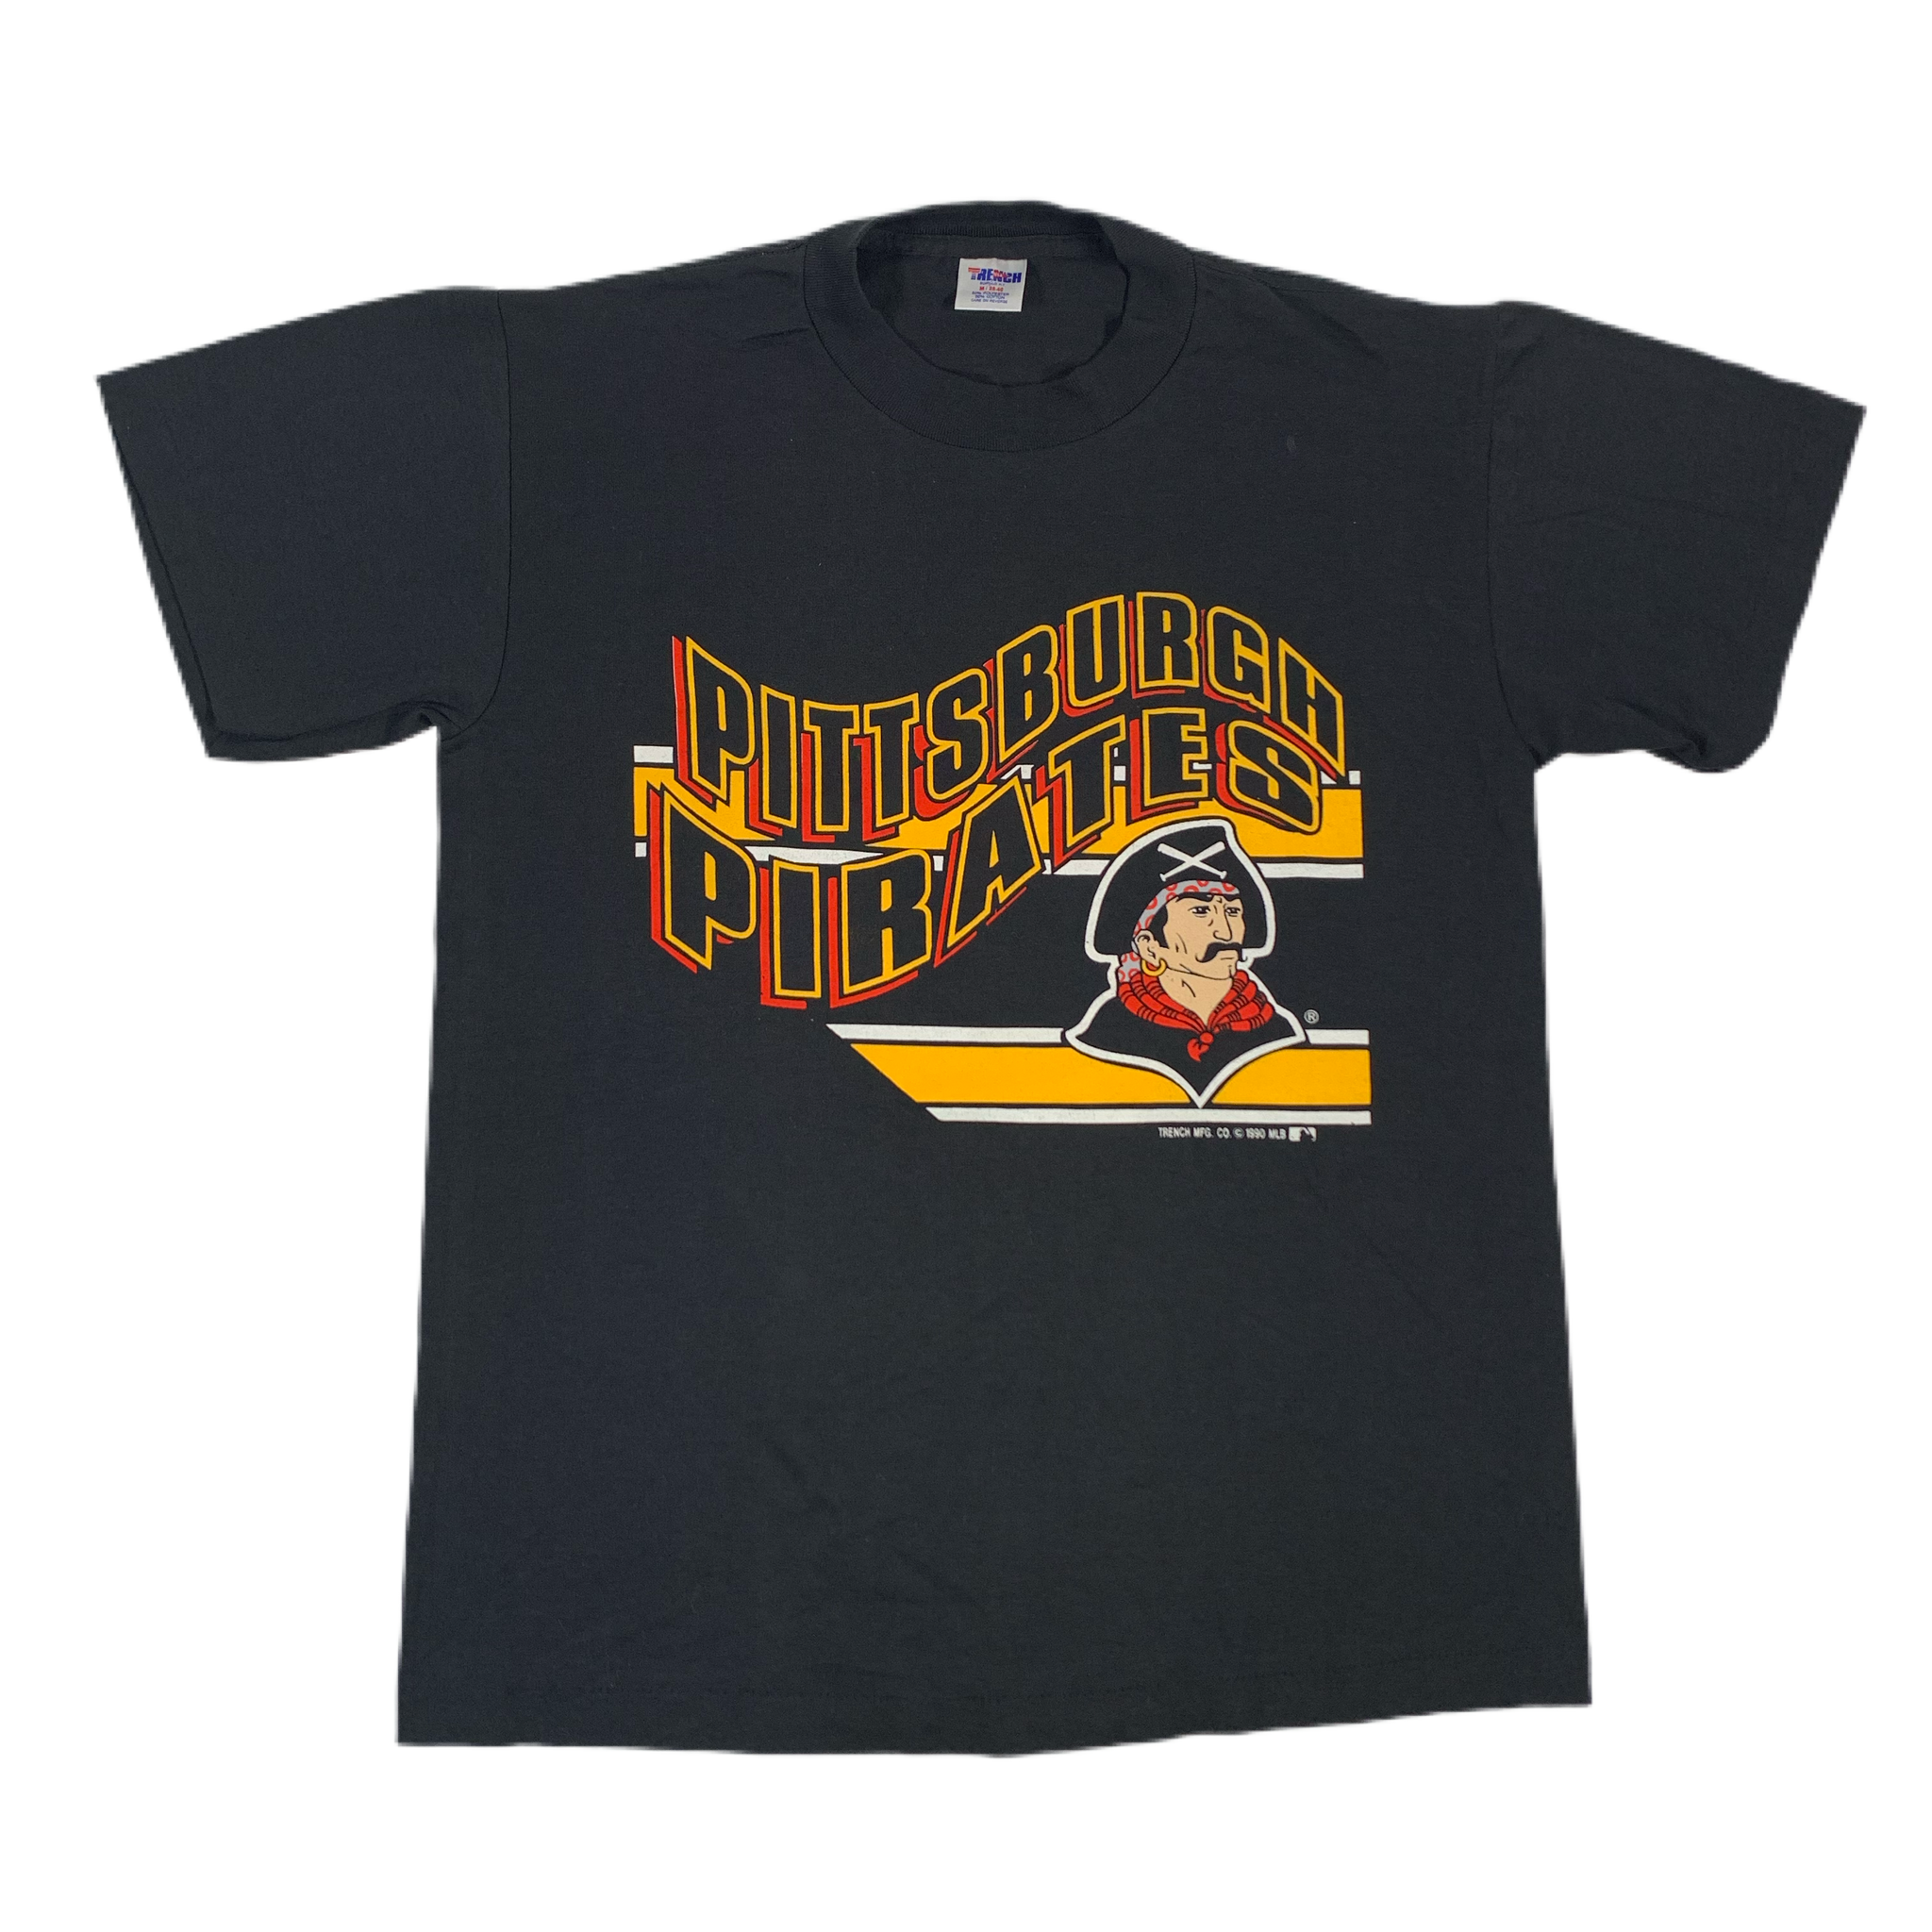 Joint Custody Vintage Pittsburgh Pirates “Trench” T-Shirt